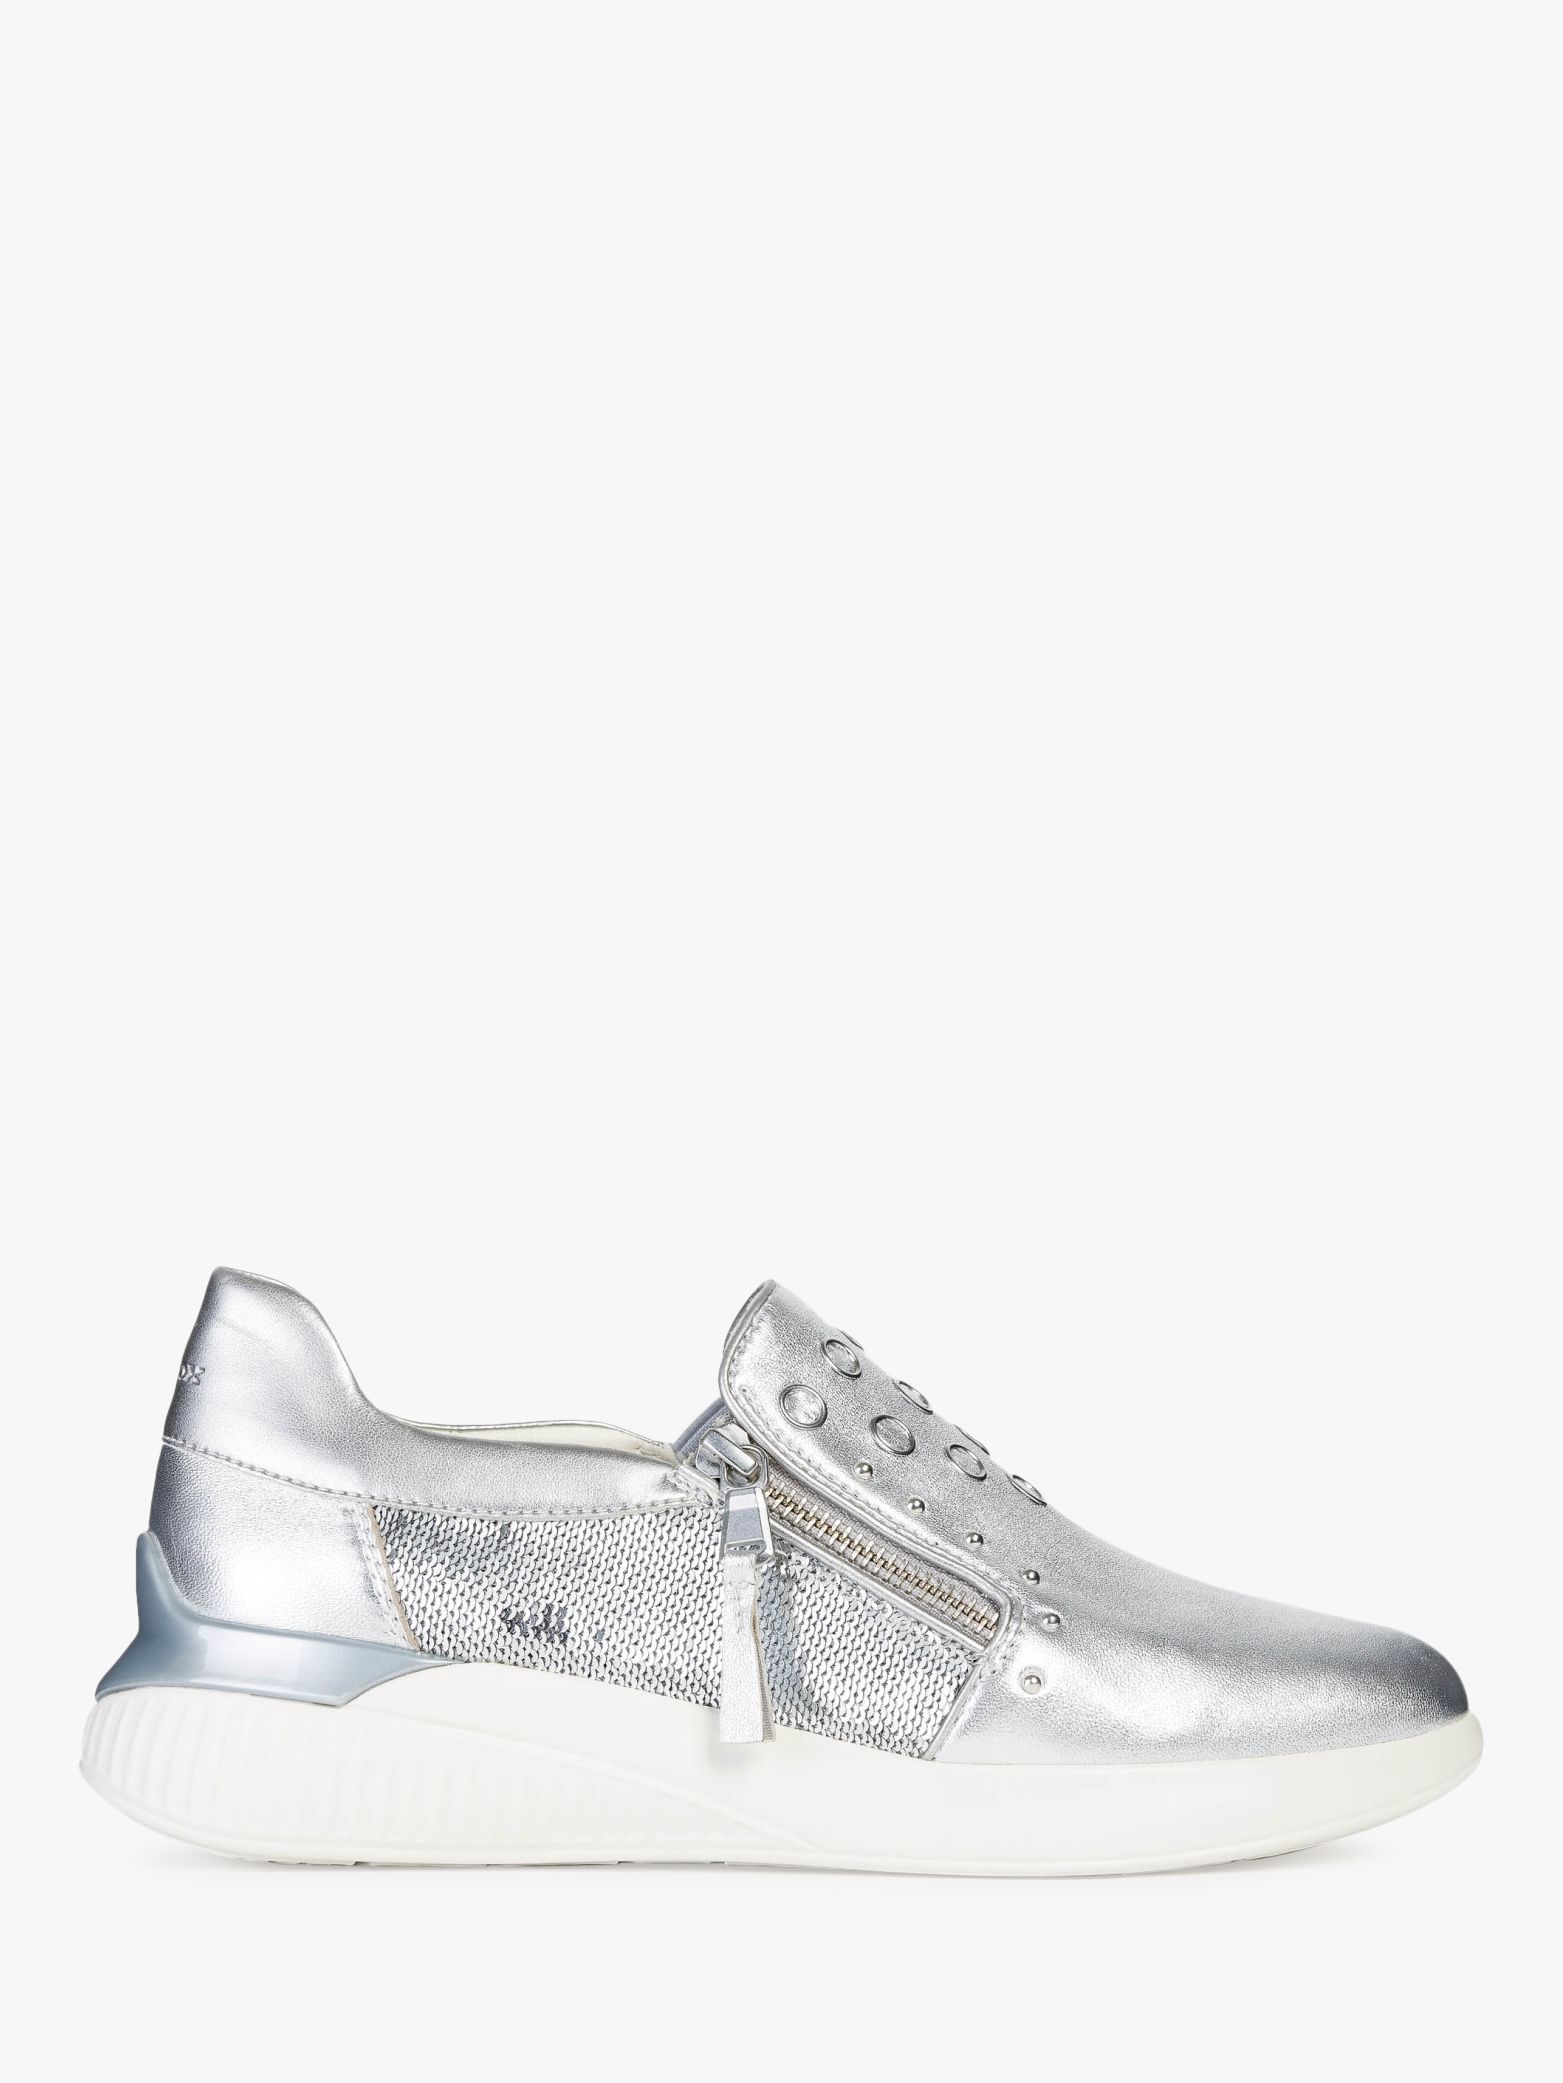 silver leather trainers ladies